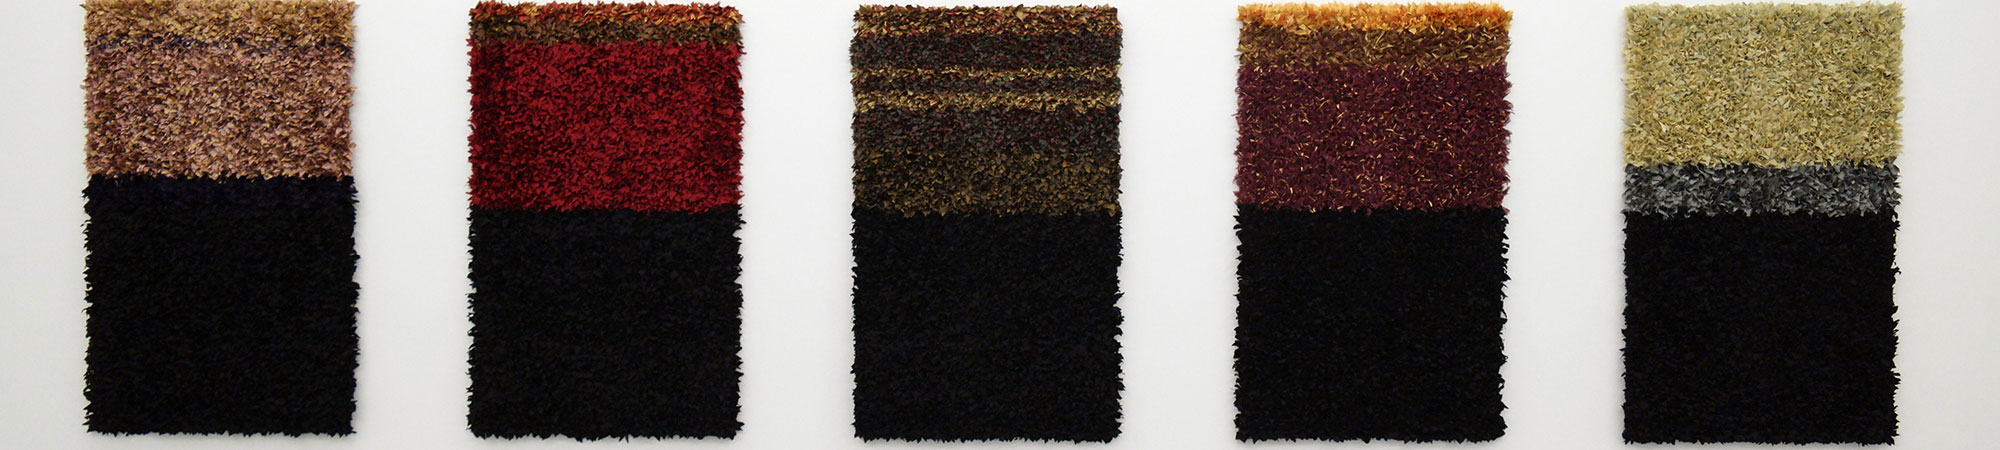 1471JoÃ«l Andrianomearisoa. 2016.  Textile on canvas 146 x 89 cm. On long-term loan from the Zeitz Collection